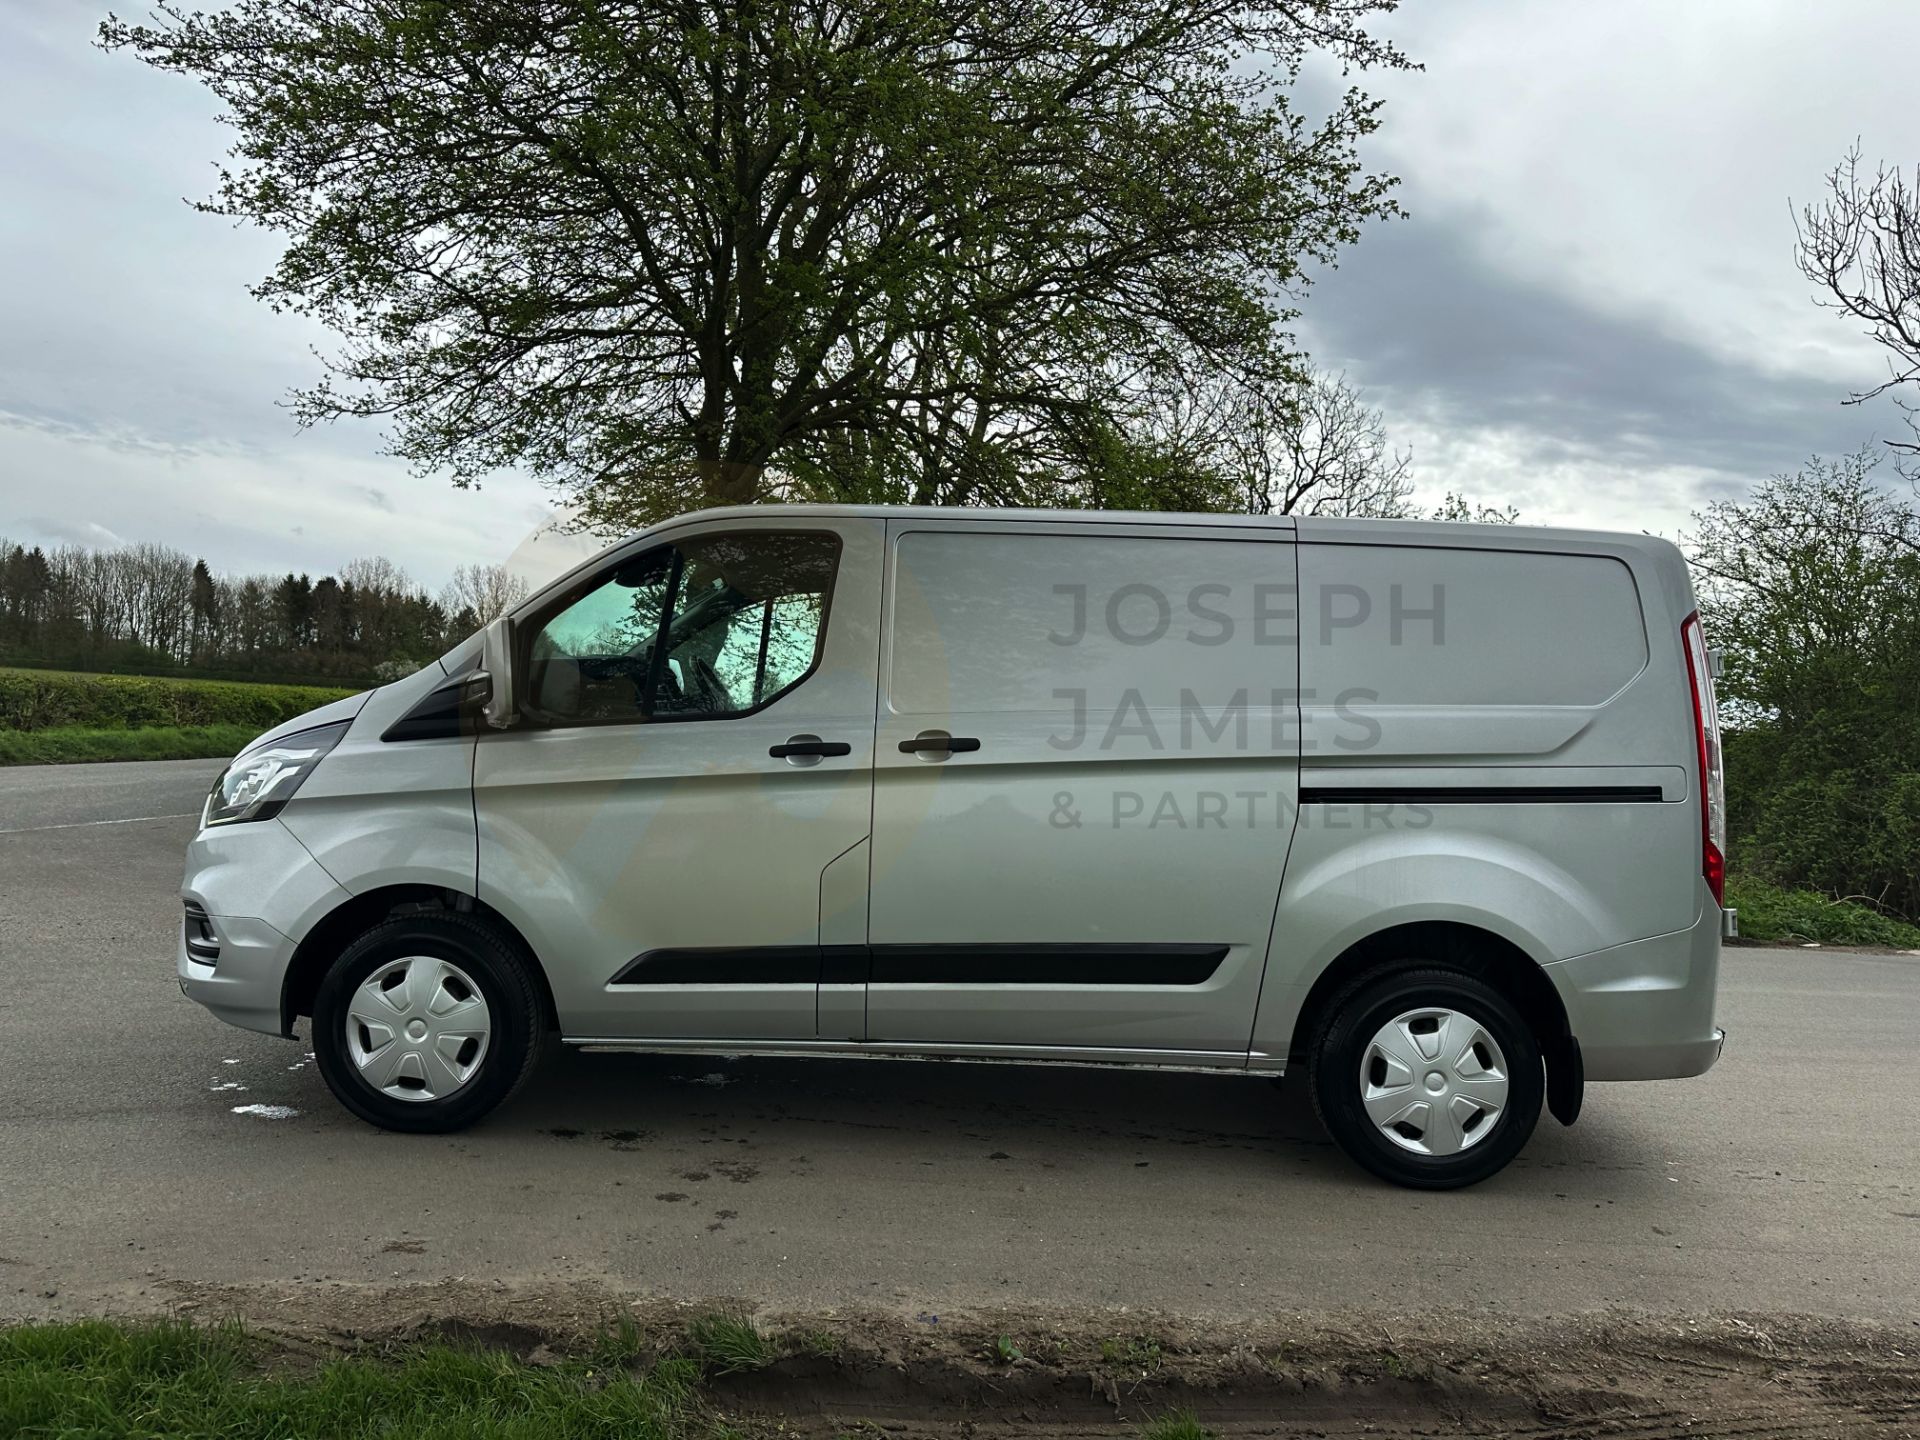 (ON SALE) FORD TRANSIT CUSTOM "TREND" 2.0TDCI (130) 20 REG -1 OWNER- SILVER -GREAT SPEC -LOW MILEAGE - Image 8 of 38